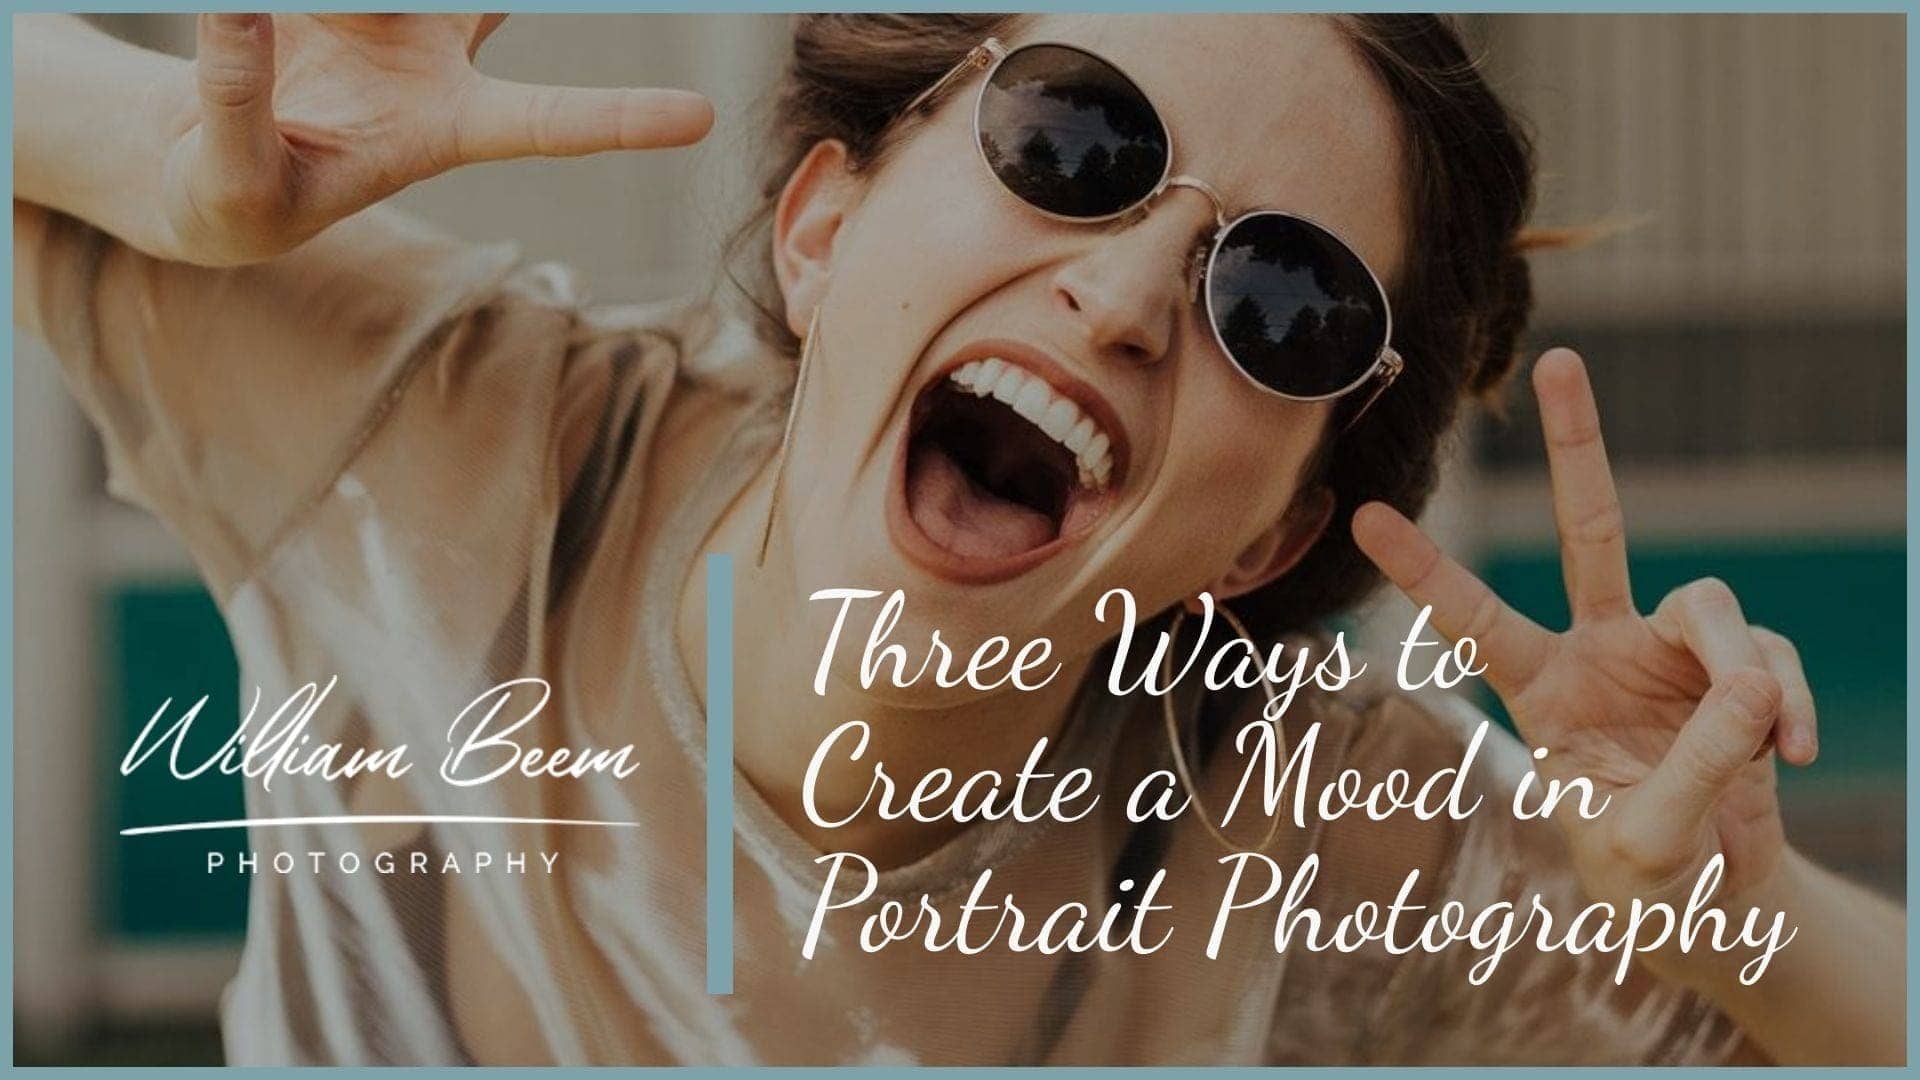 Three Ways to Create a Mood in Portrait Photography